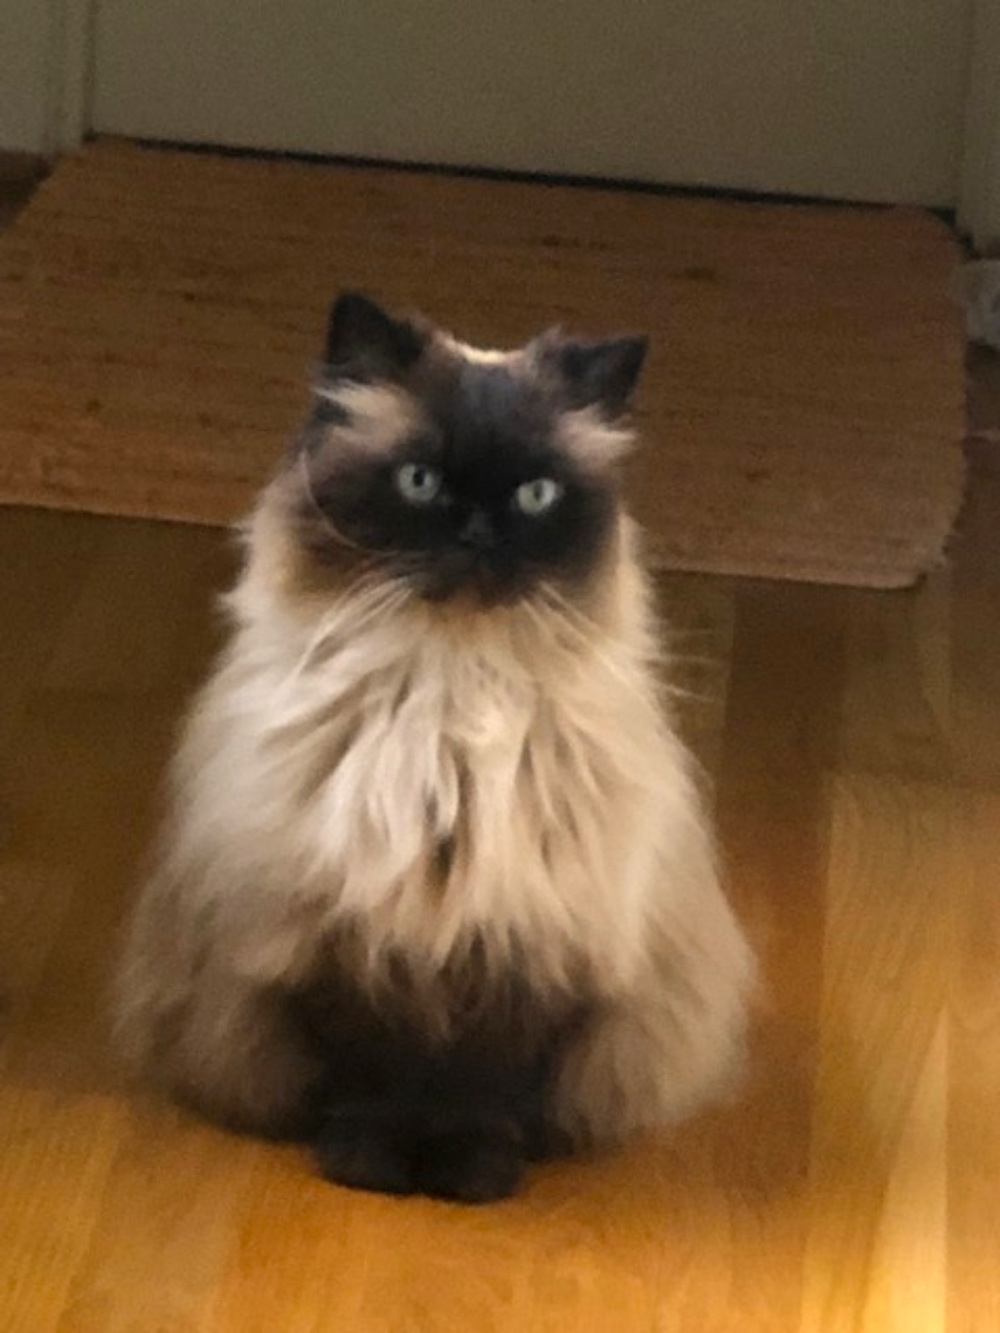 My name is Cosmos! I’m a 15-year-old Himalayan in Portland.